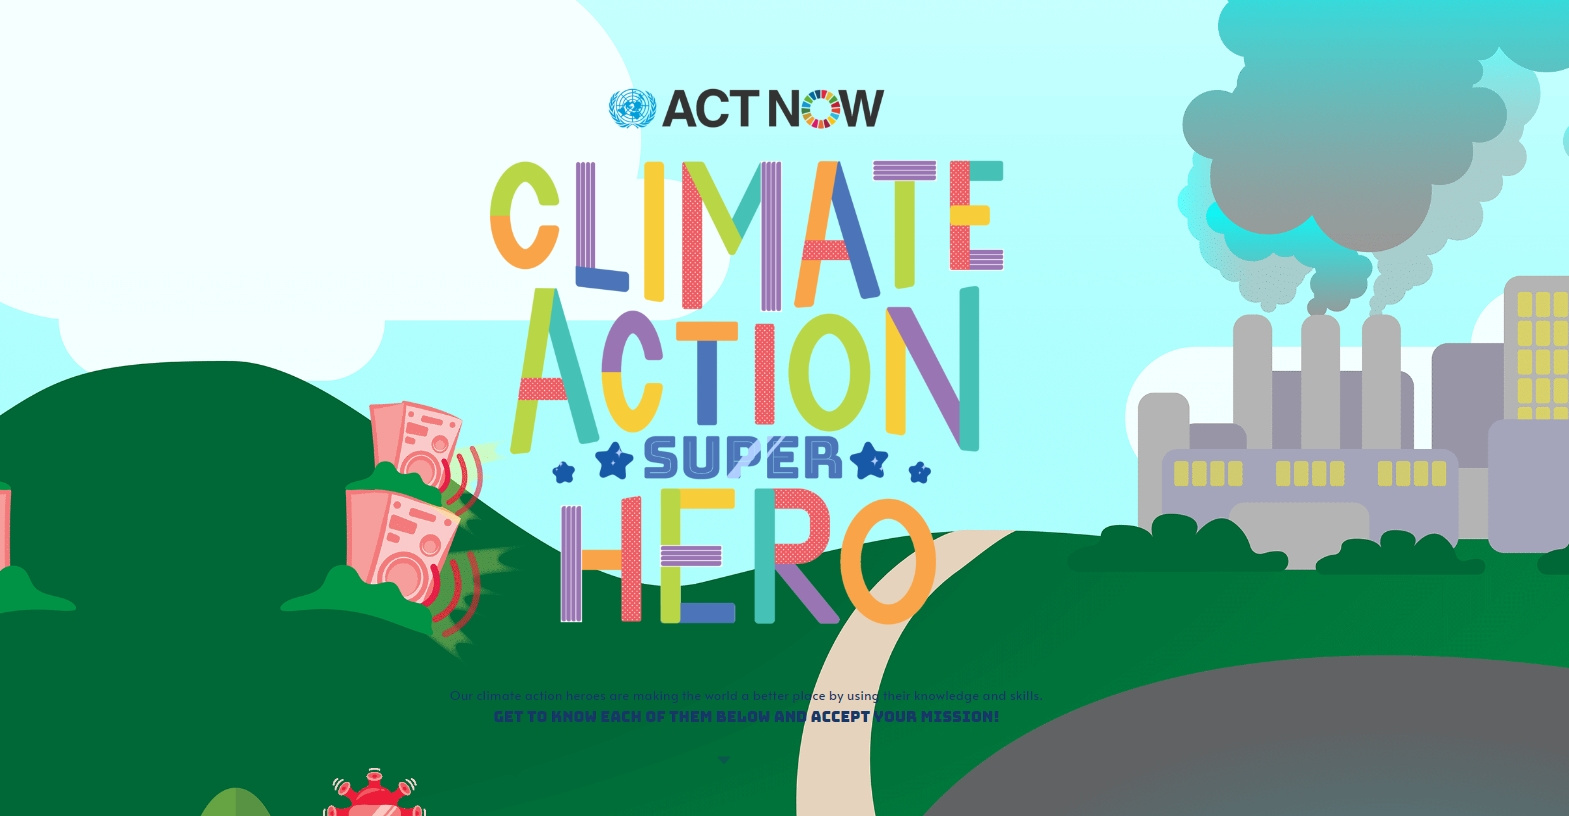 A graphic with the title "Act now - climate action super hero" 